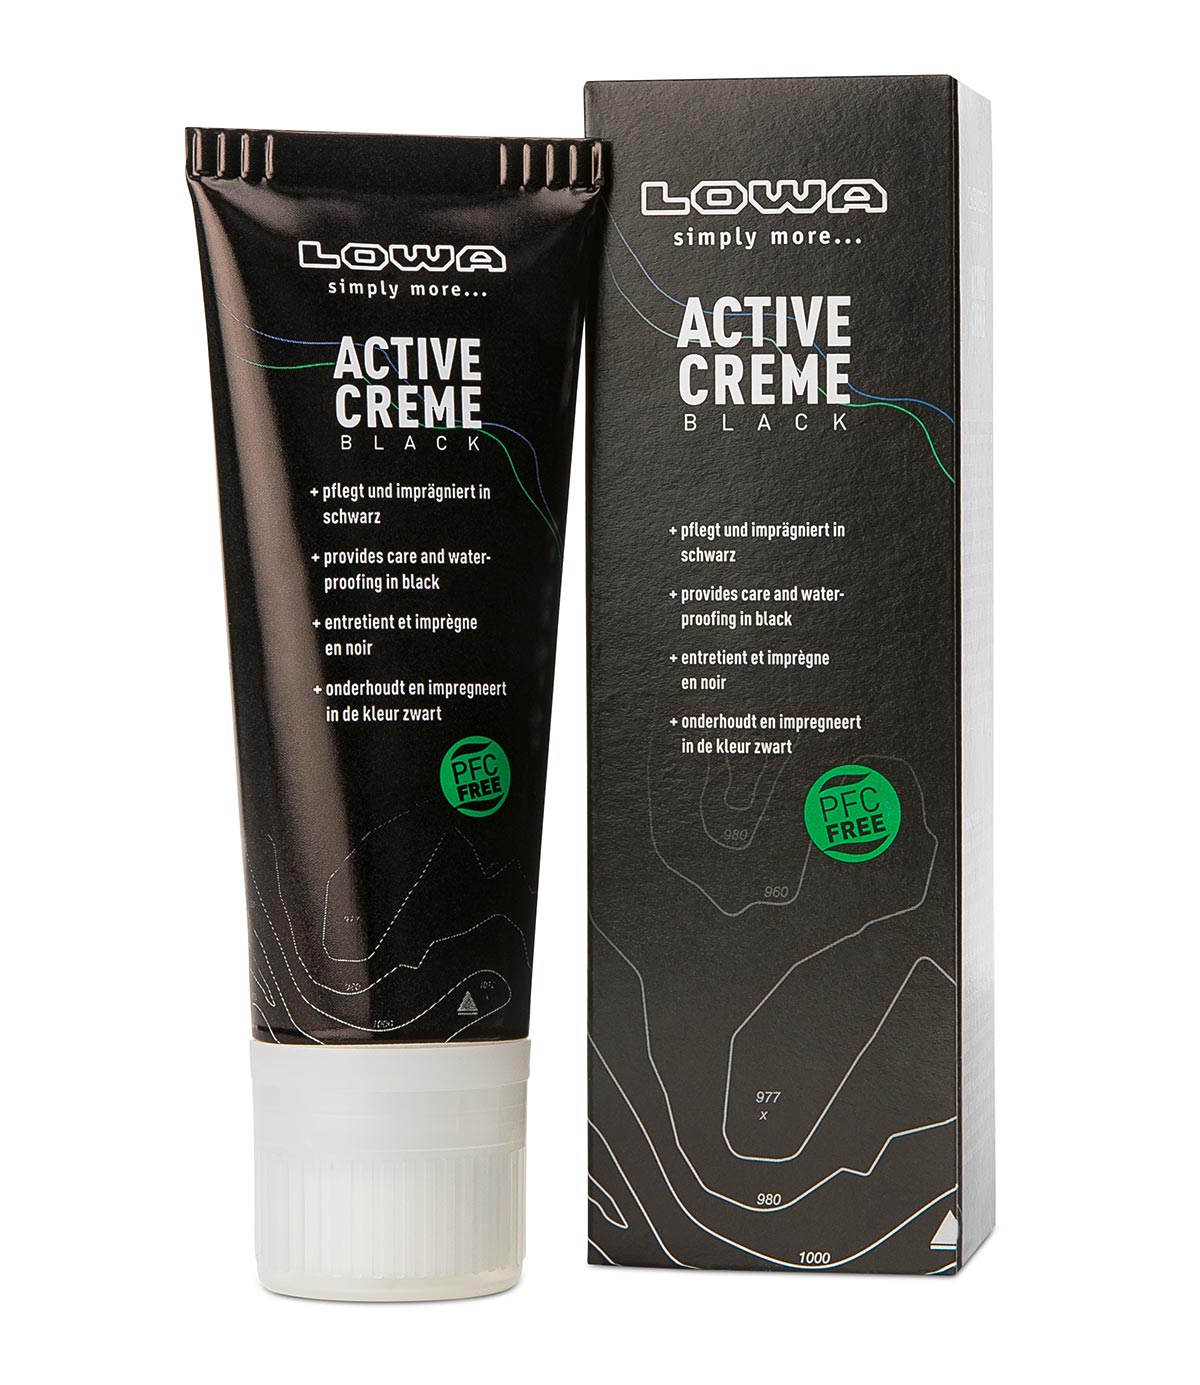 LOWA active creme in black on a white background